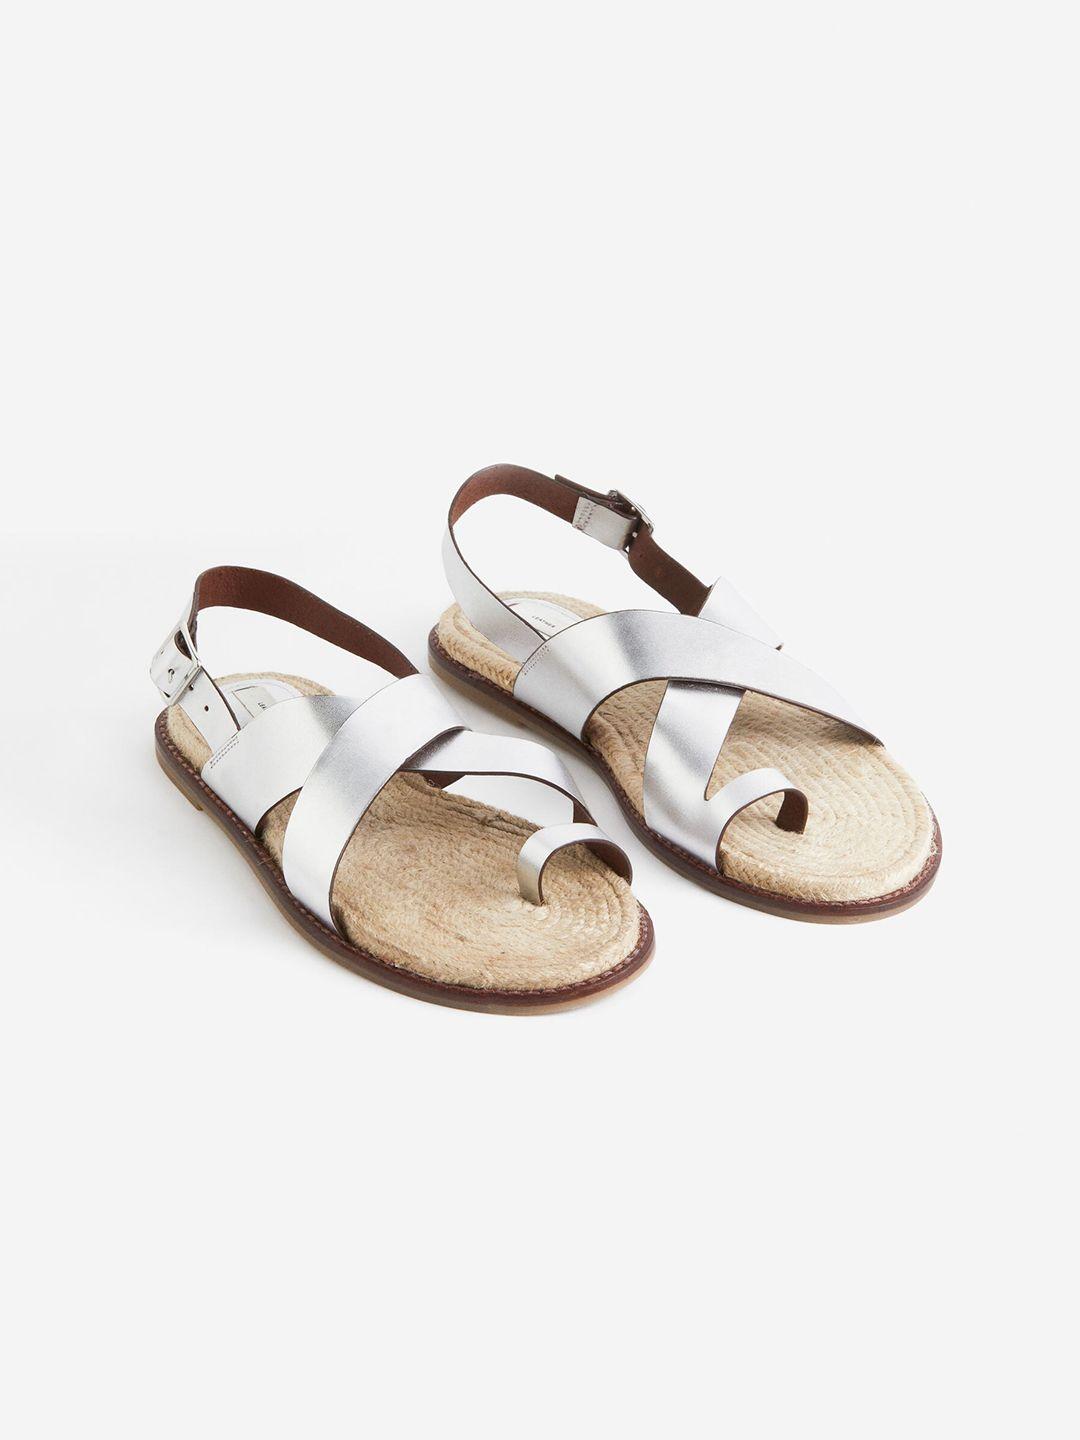 h&m leather sandals